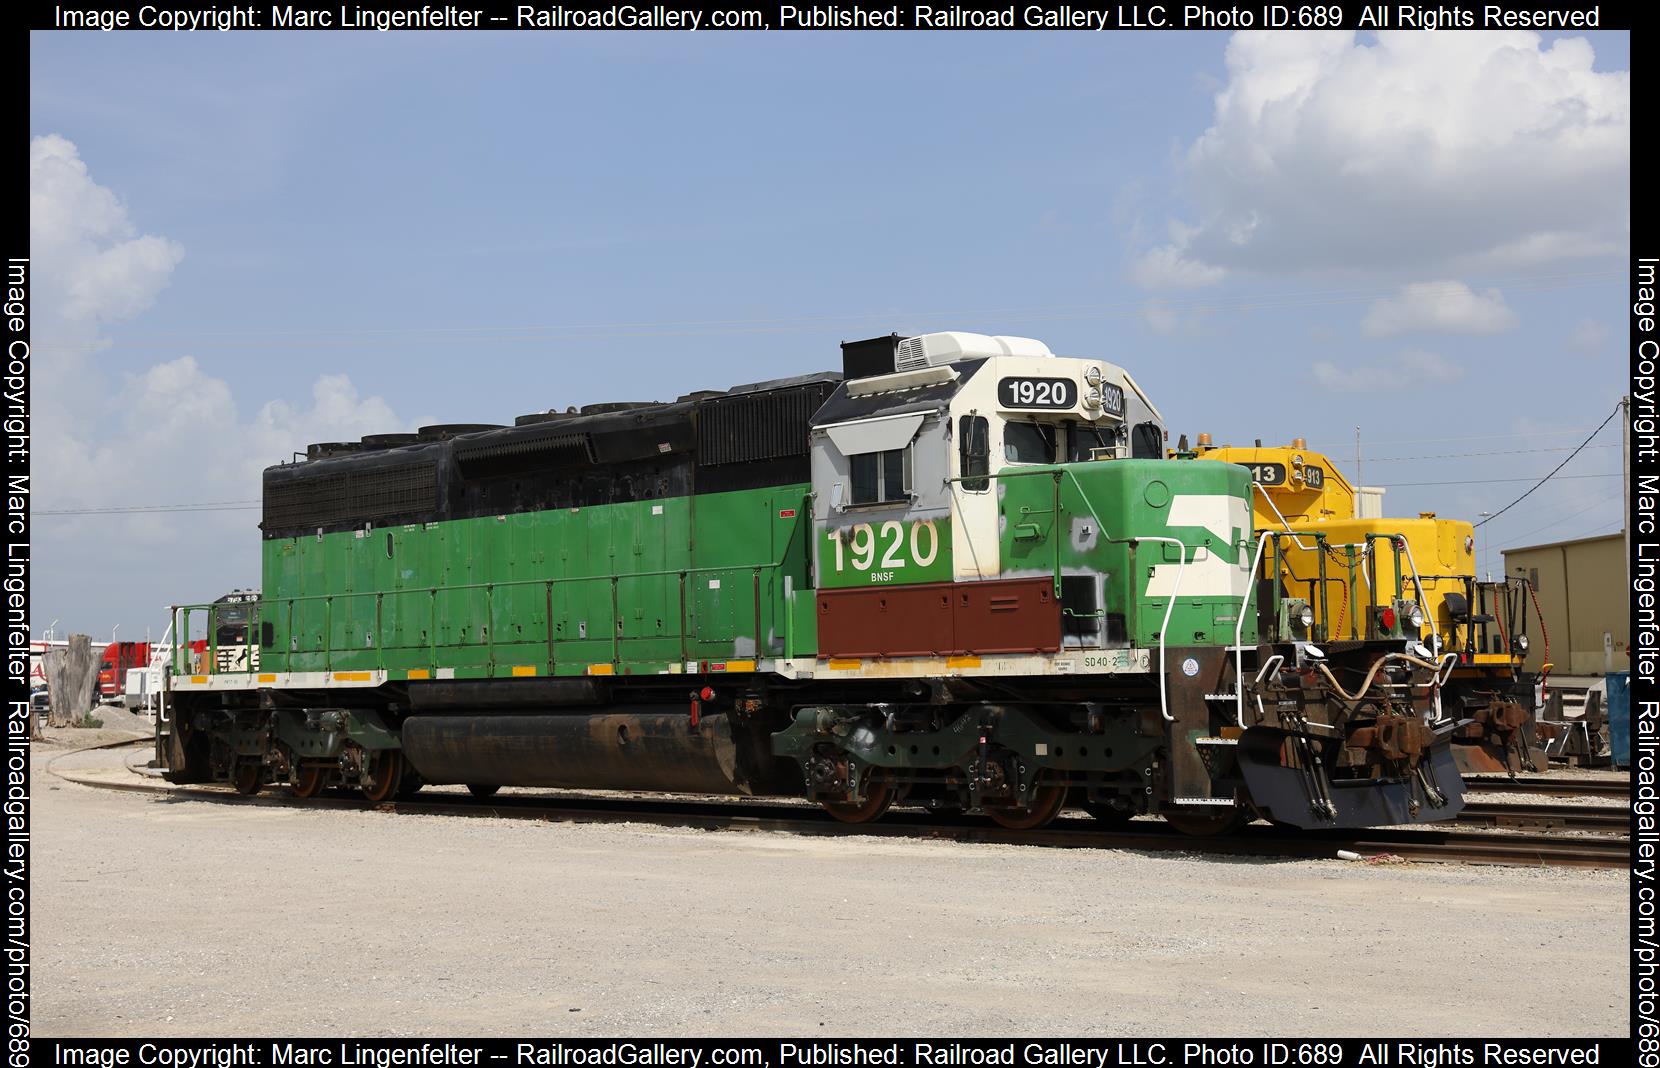 BNSF 1920 is a class EMD SD40-2 and  is pictured in Kansas City, Missouri, USA.  This was taken along the None on the BNSF Railway. Photo Copyright: Marc Lingenfelter uploaded to Railroad Gallery on 02/12/2023. This photograph of BNSF 1920 was taken on Saturday, June 18, 2022. All Rights Reserved. 